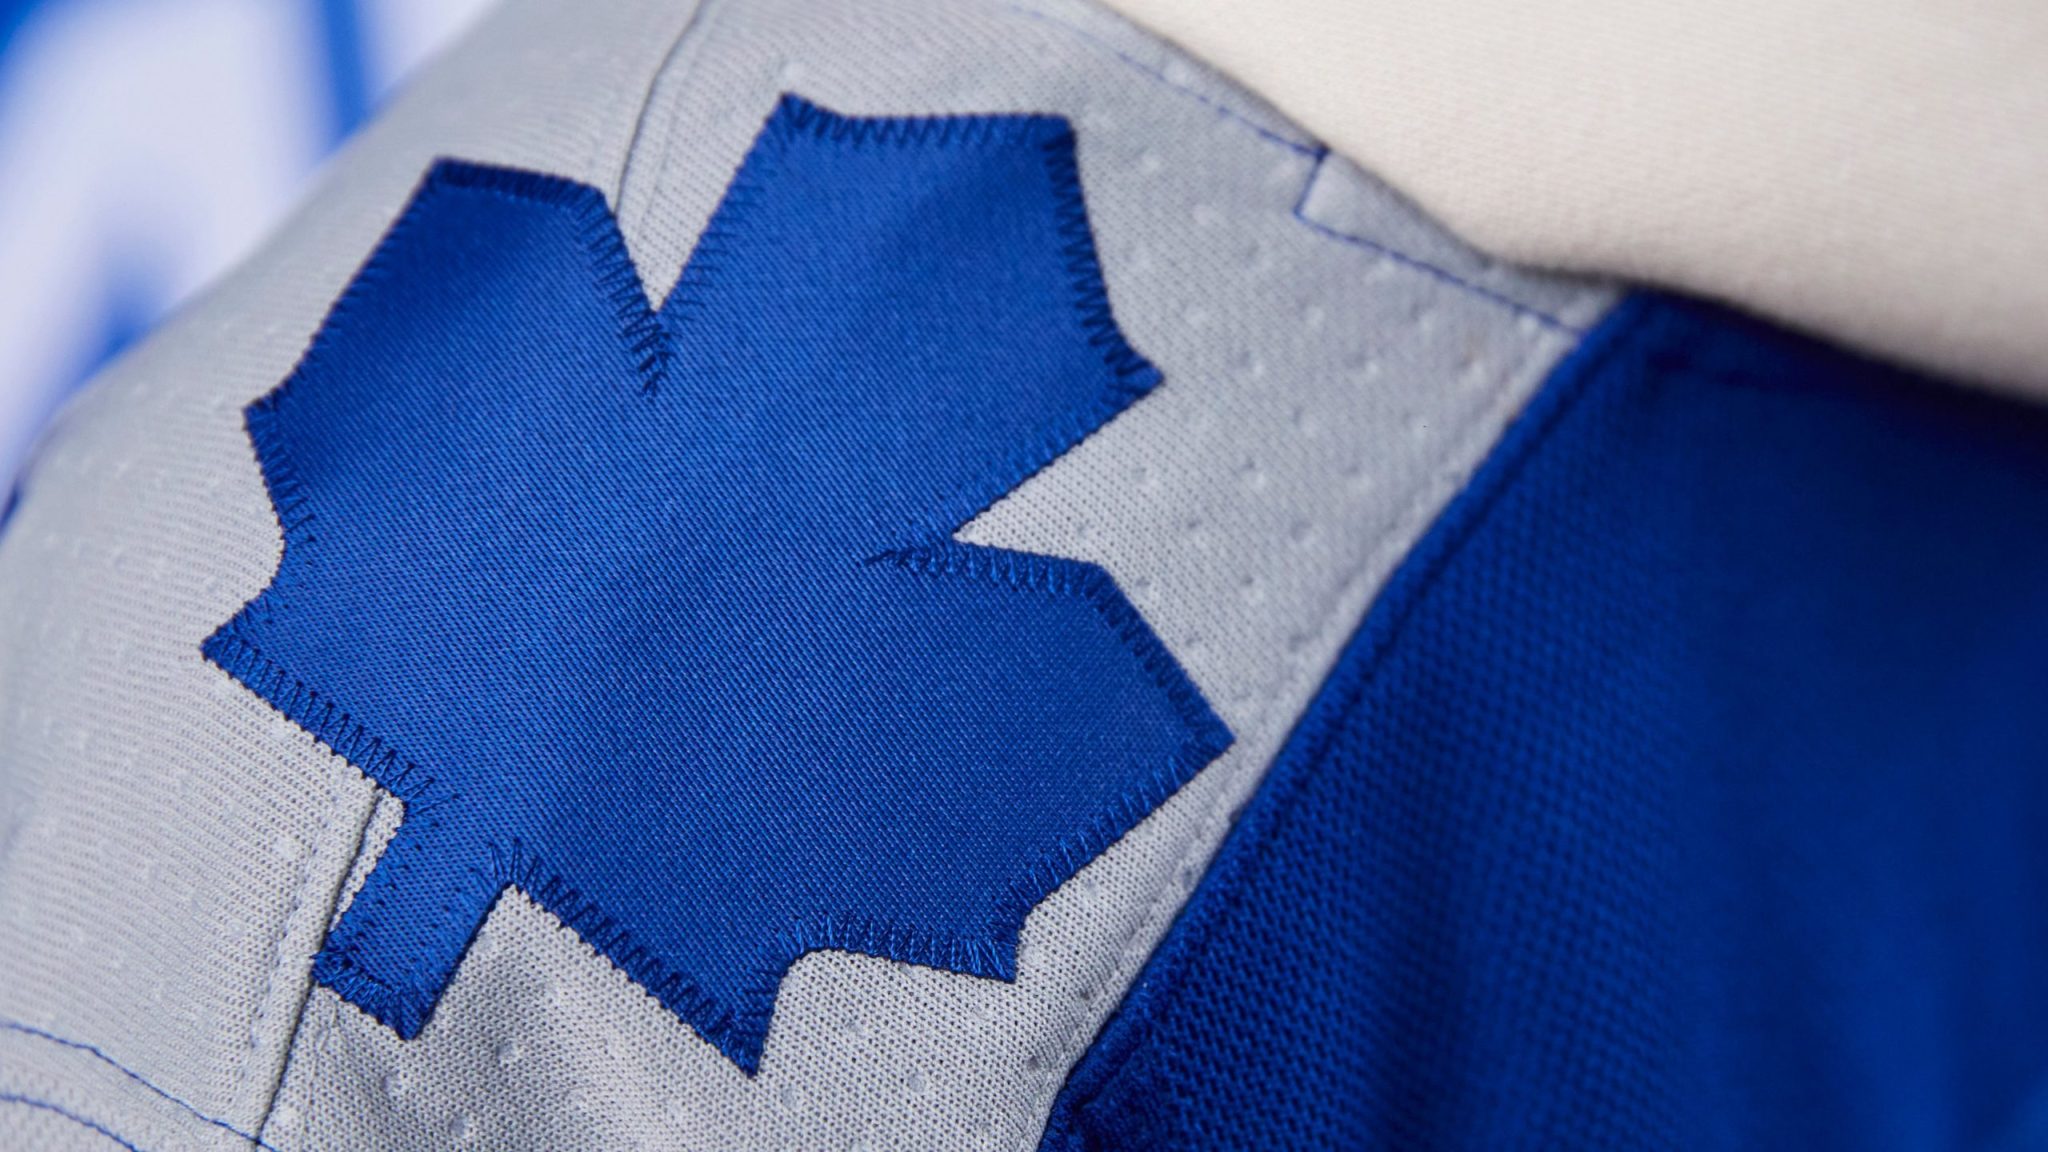 Leafs release new-look reverse retro jerseys for this season (PHOTOS)